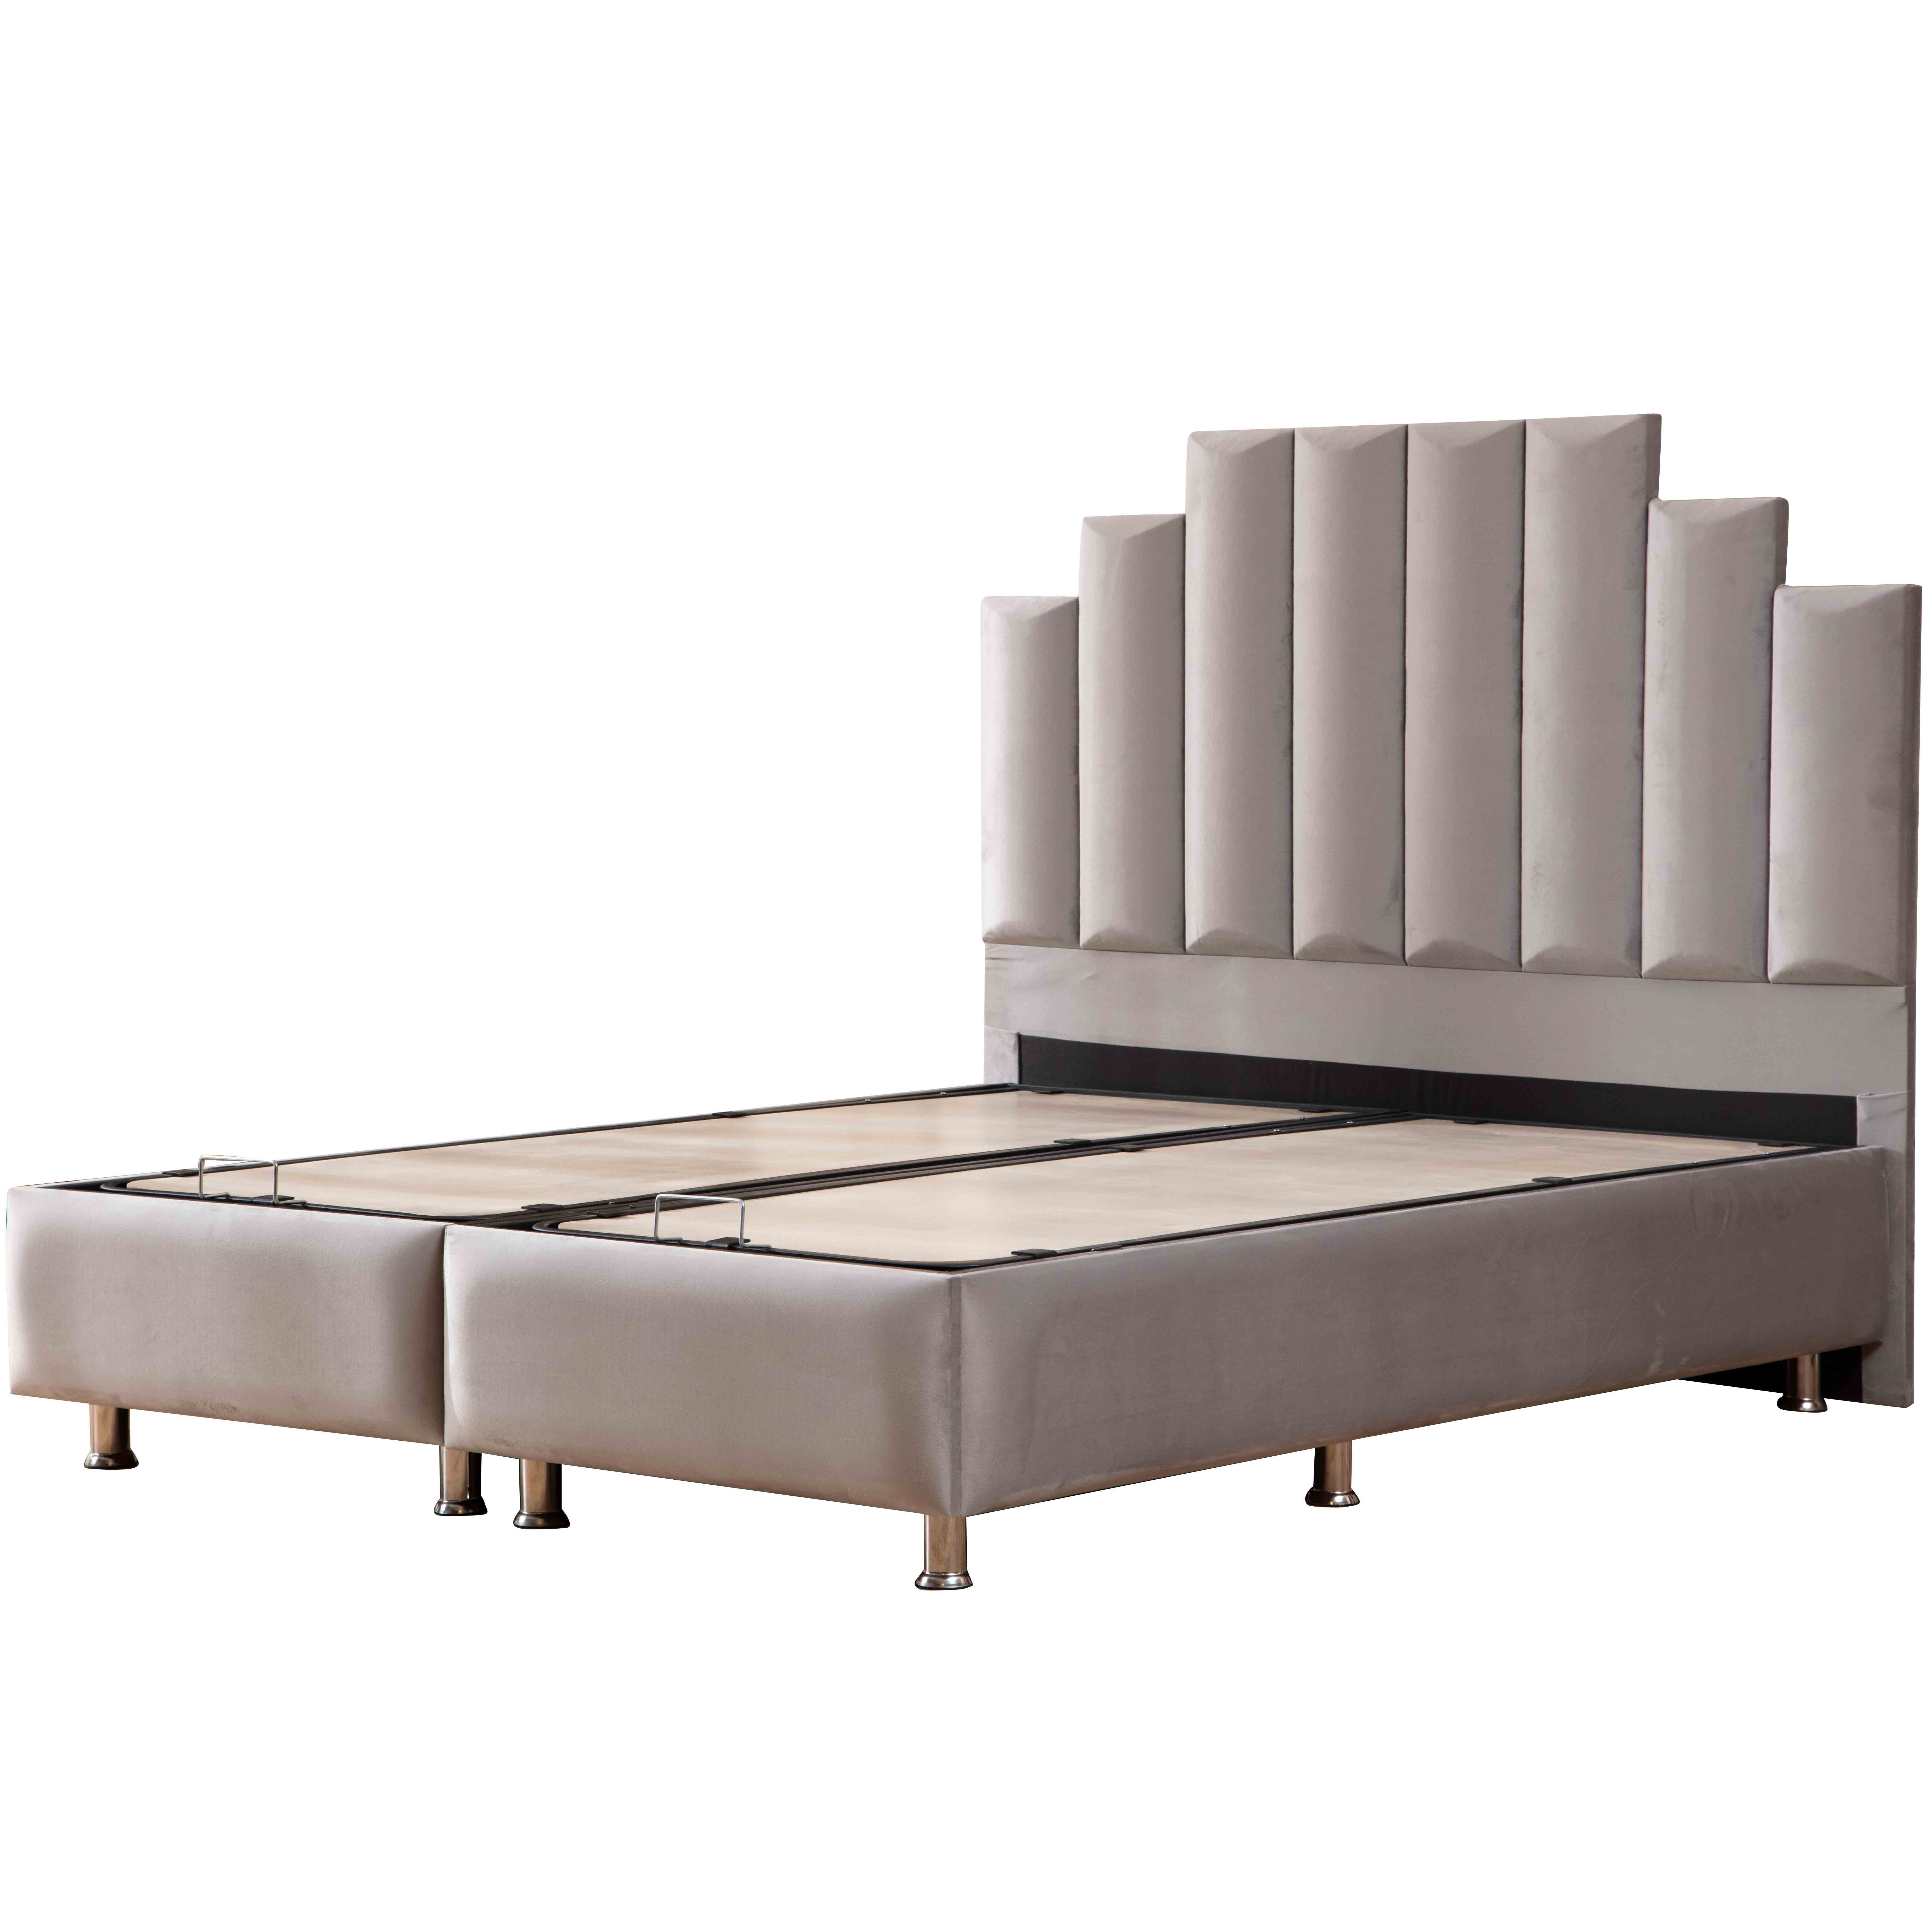 Natura Bed With Storage 120x200 cm